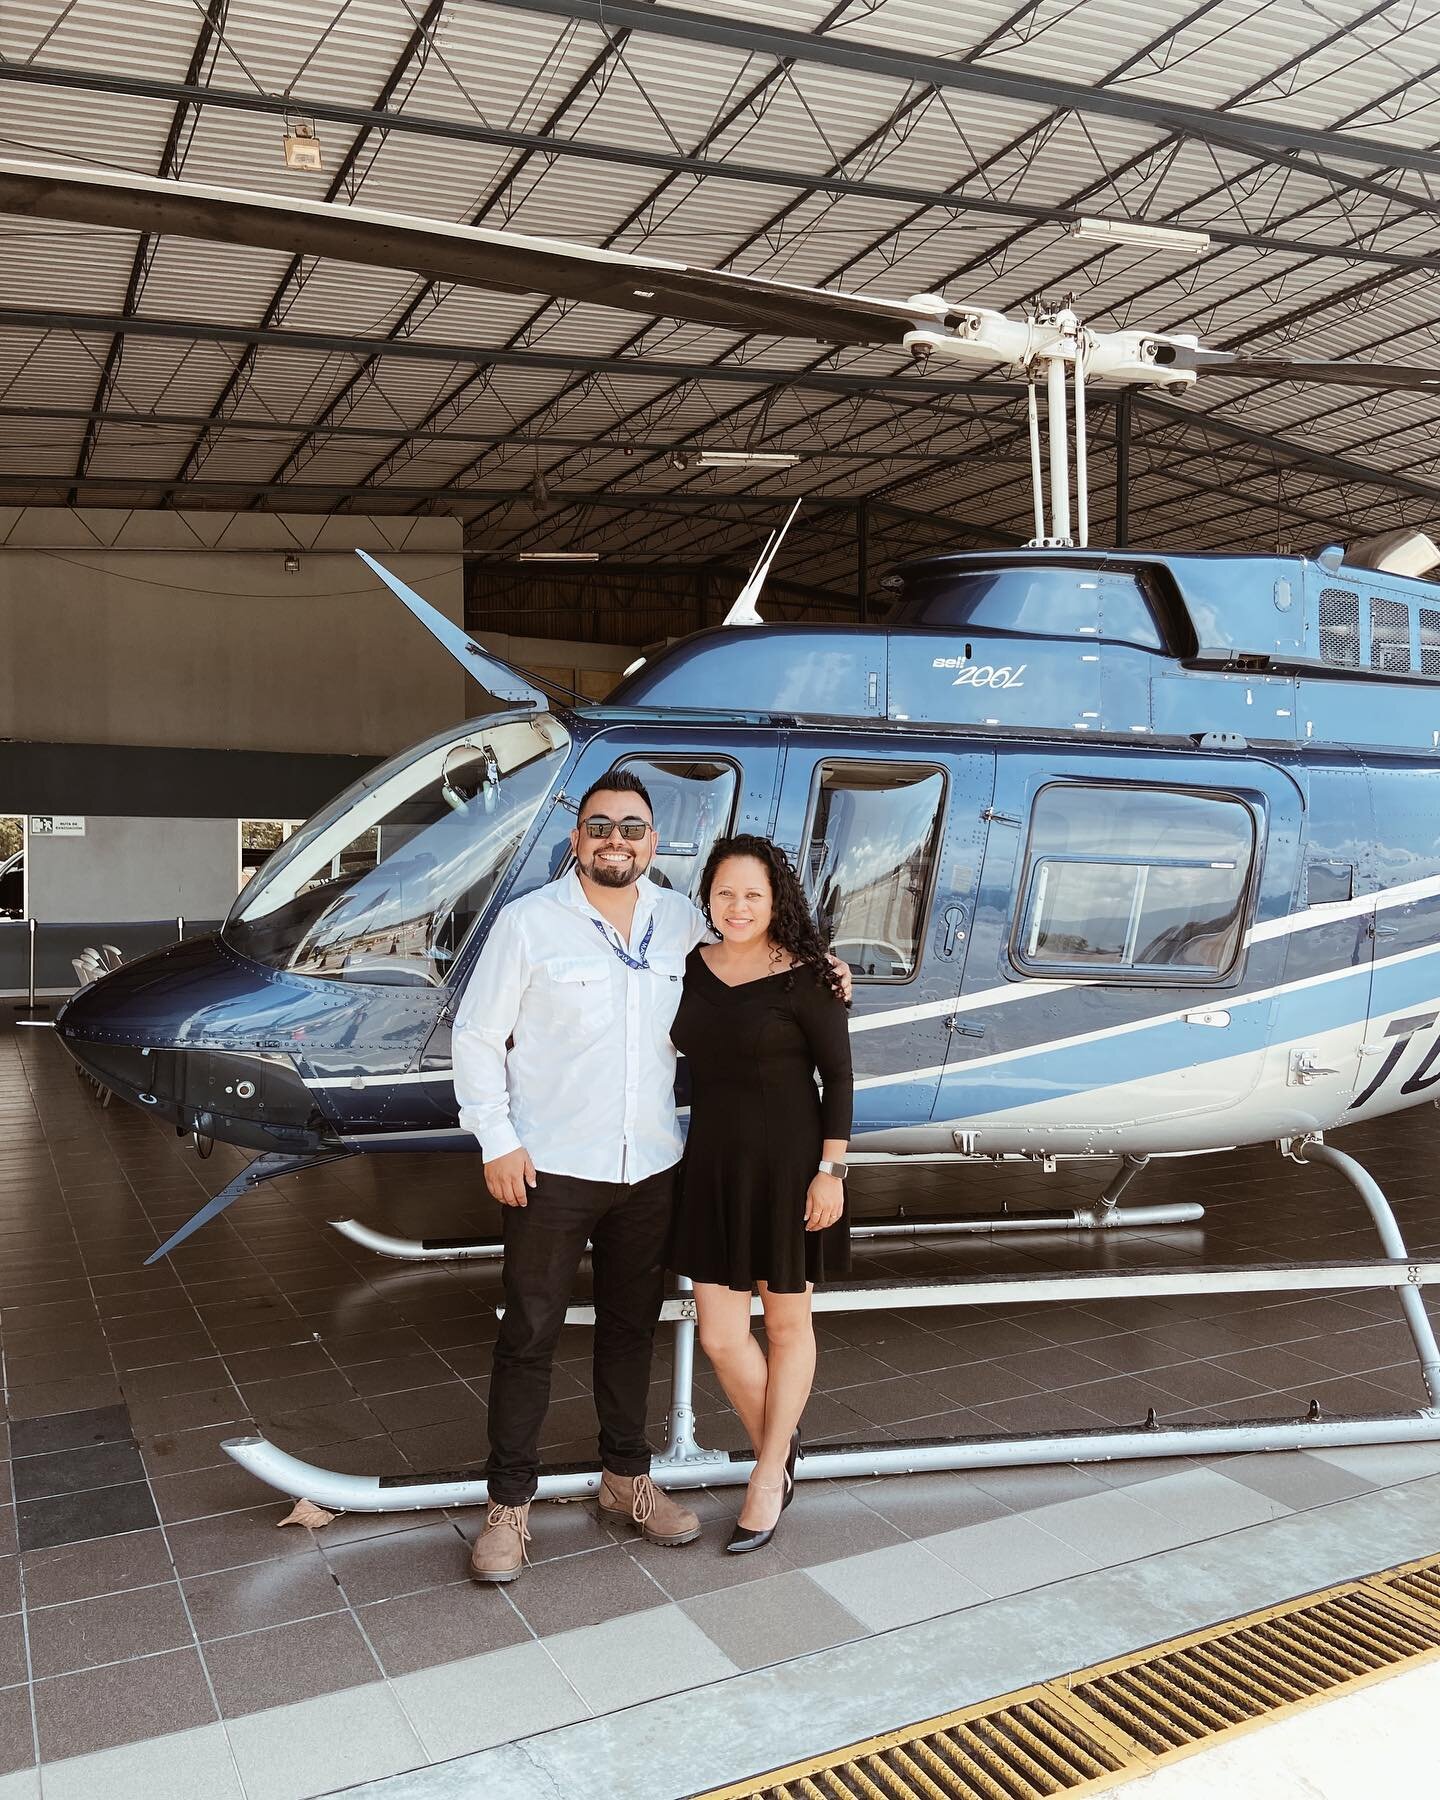 We are delighted to announce our partnership with @mayajetshelicopters to offer helicopter tours to the most emblematic archaeological sites of the Mayan World in Guatemala. El Mirador, Piedras Negras, Holmul, Nakbe among others. 
&ldquo;Come and dis